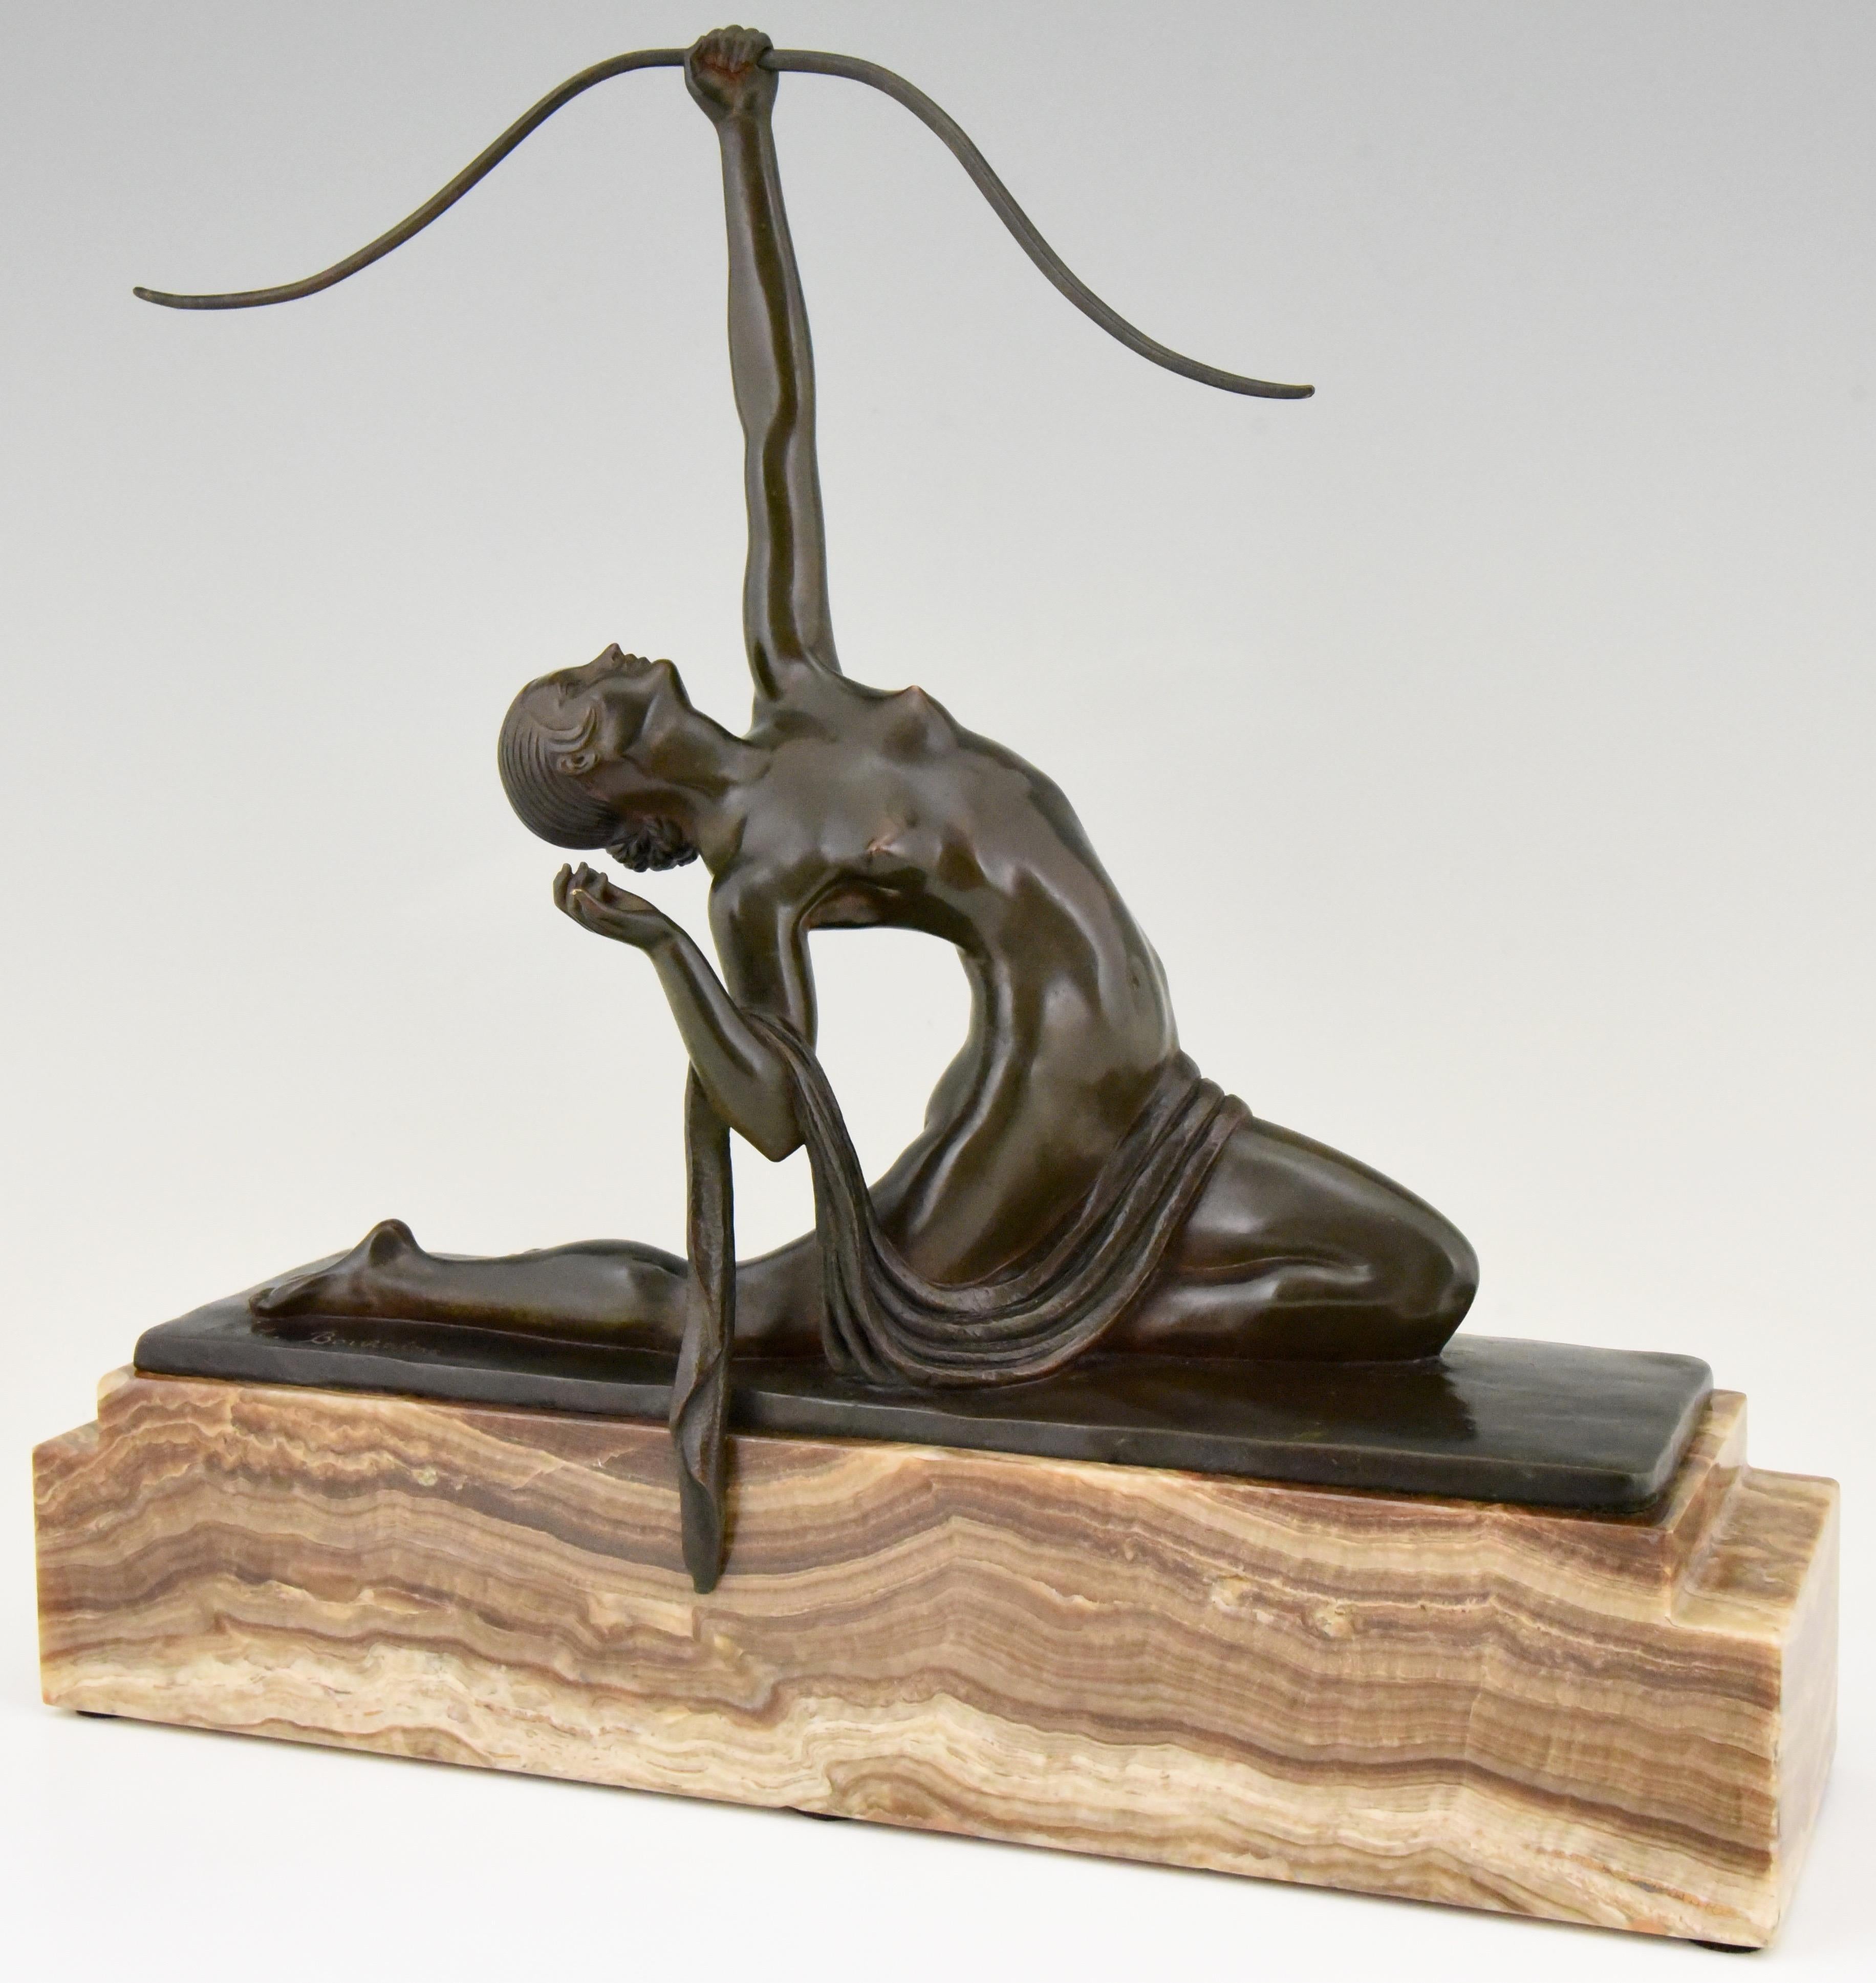 Diana, female archer. A bronze by Marcel Bouraine of a naked young woman with length of cloth draped across lap, kneeling backwards and aiming with a bow towards the sky. On a stepped rectangular marble base.
Literature:
This model is illustrated